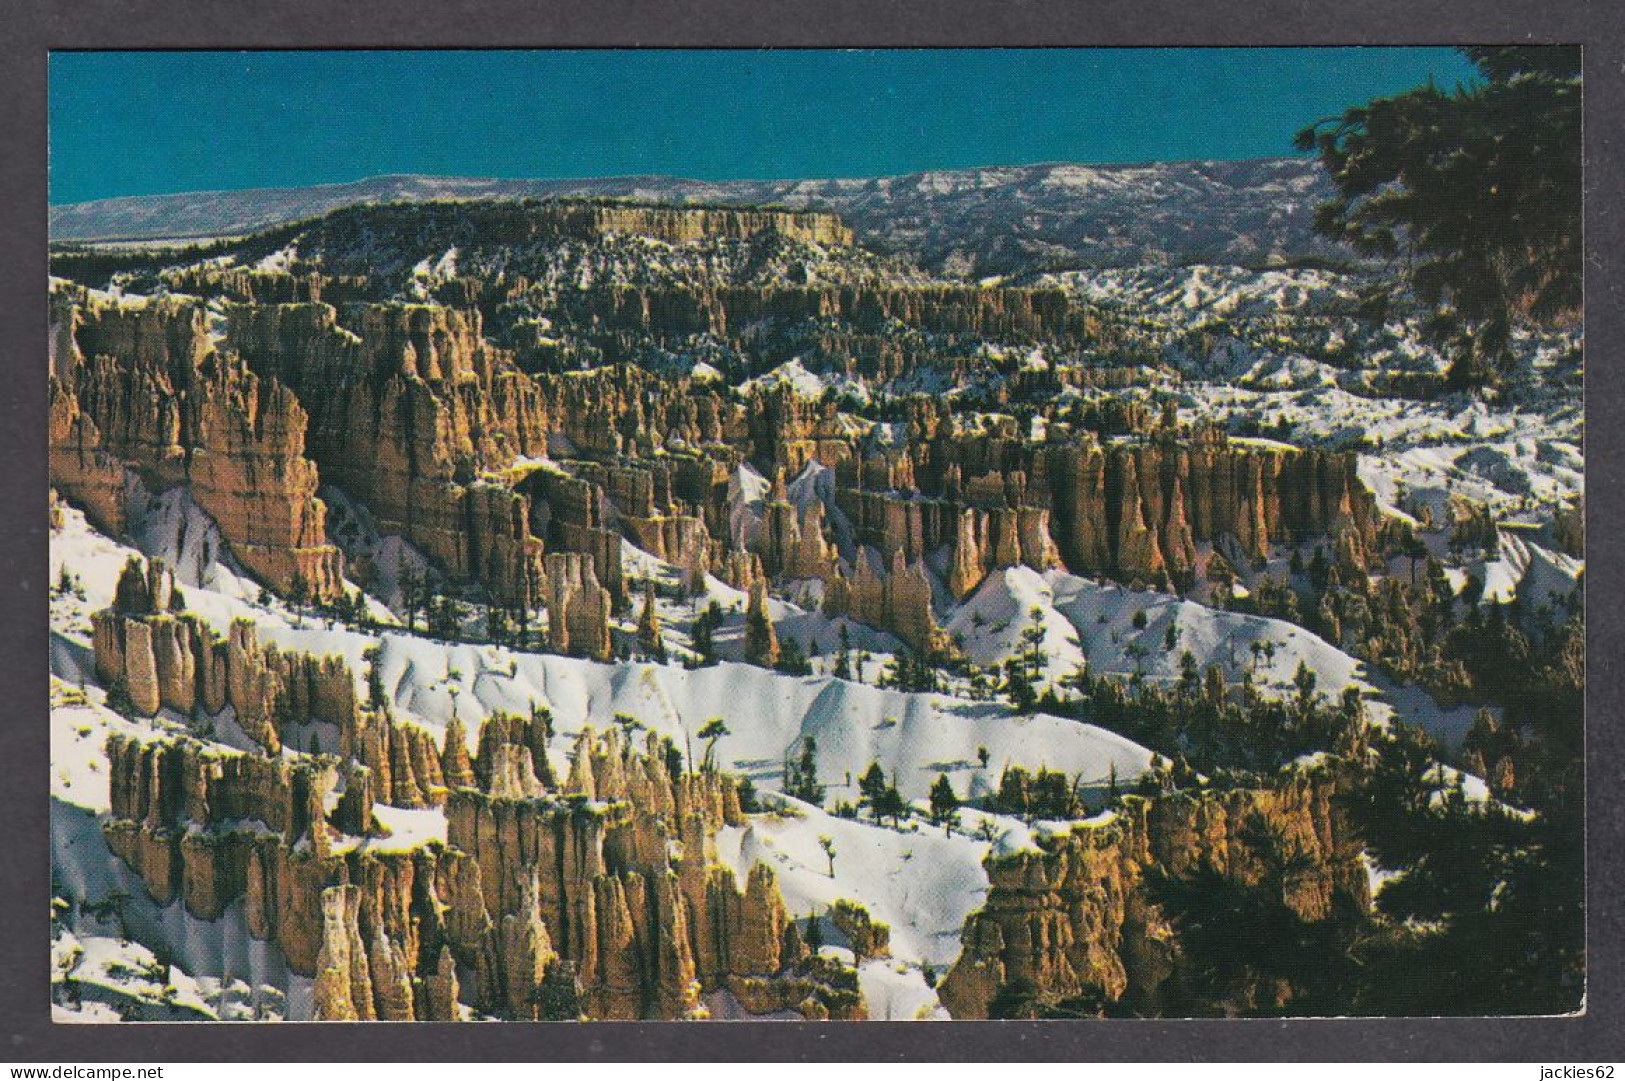 115186/ BRYCE CANYON NATIONAL PARK In Winter - Bryce Canyon